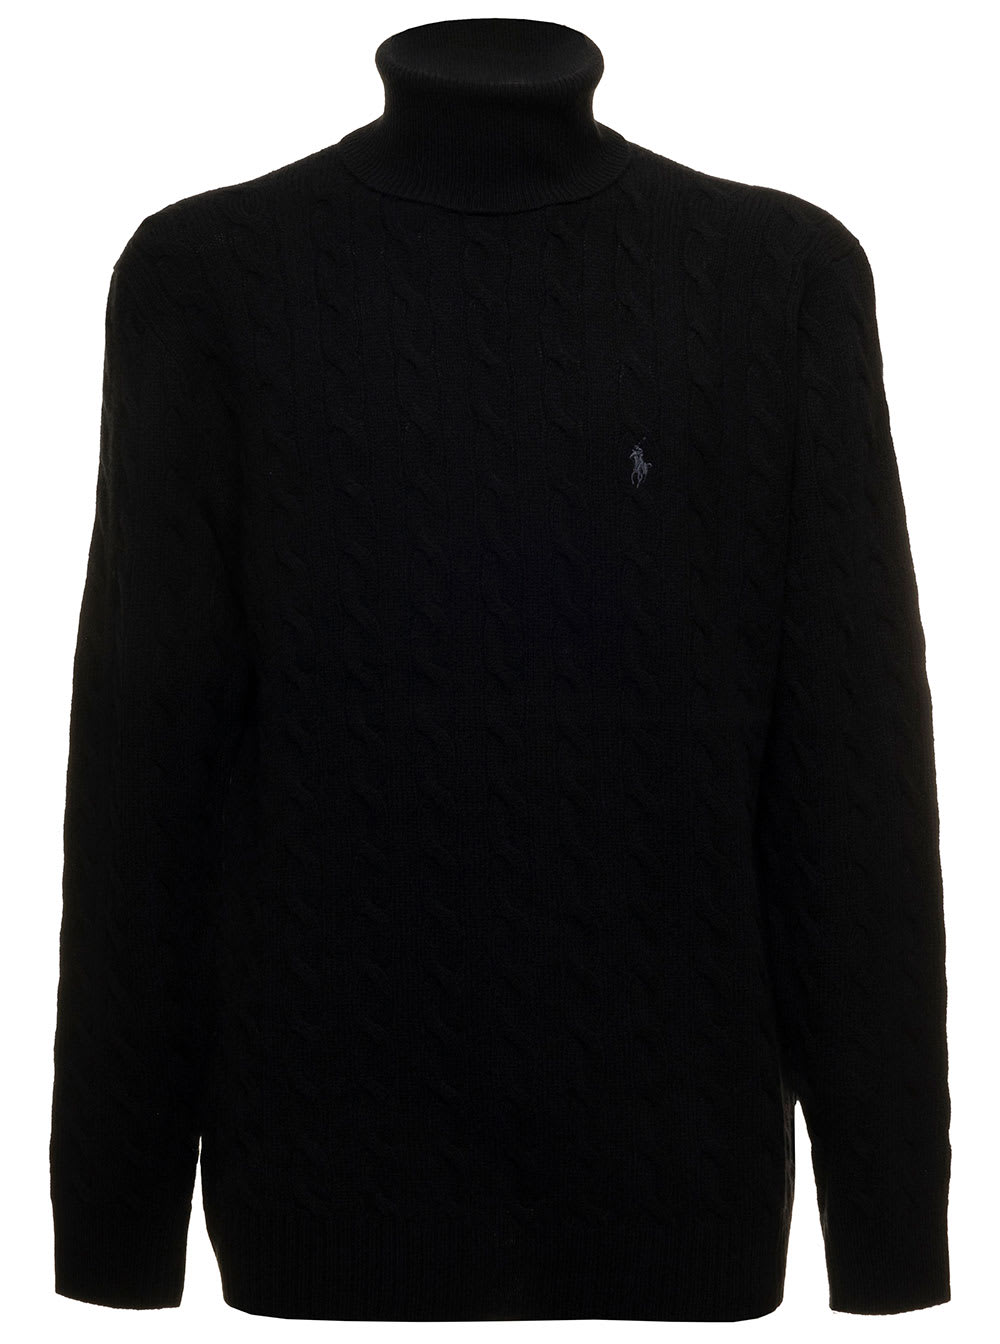 Ralph Lauren Black Turtleneck In Cable Wool And Cashmere Knit With Contrast Logo Embroidery On The Chest Man